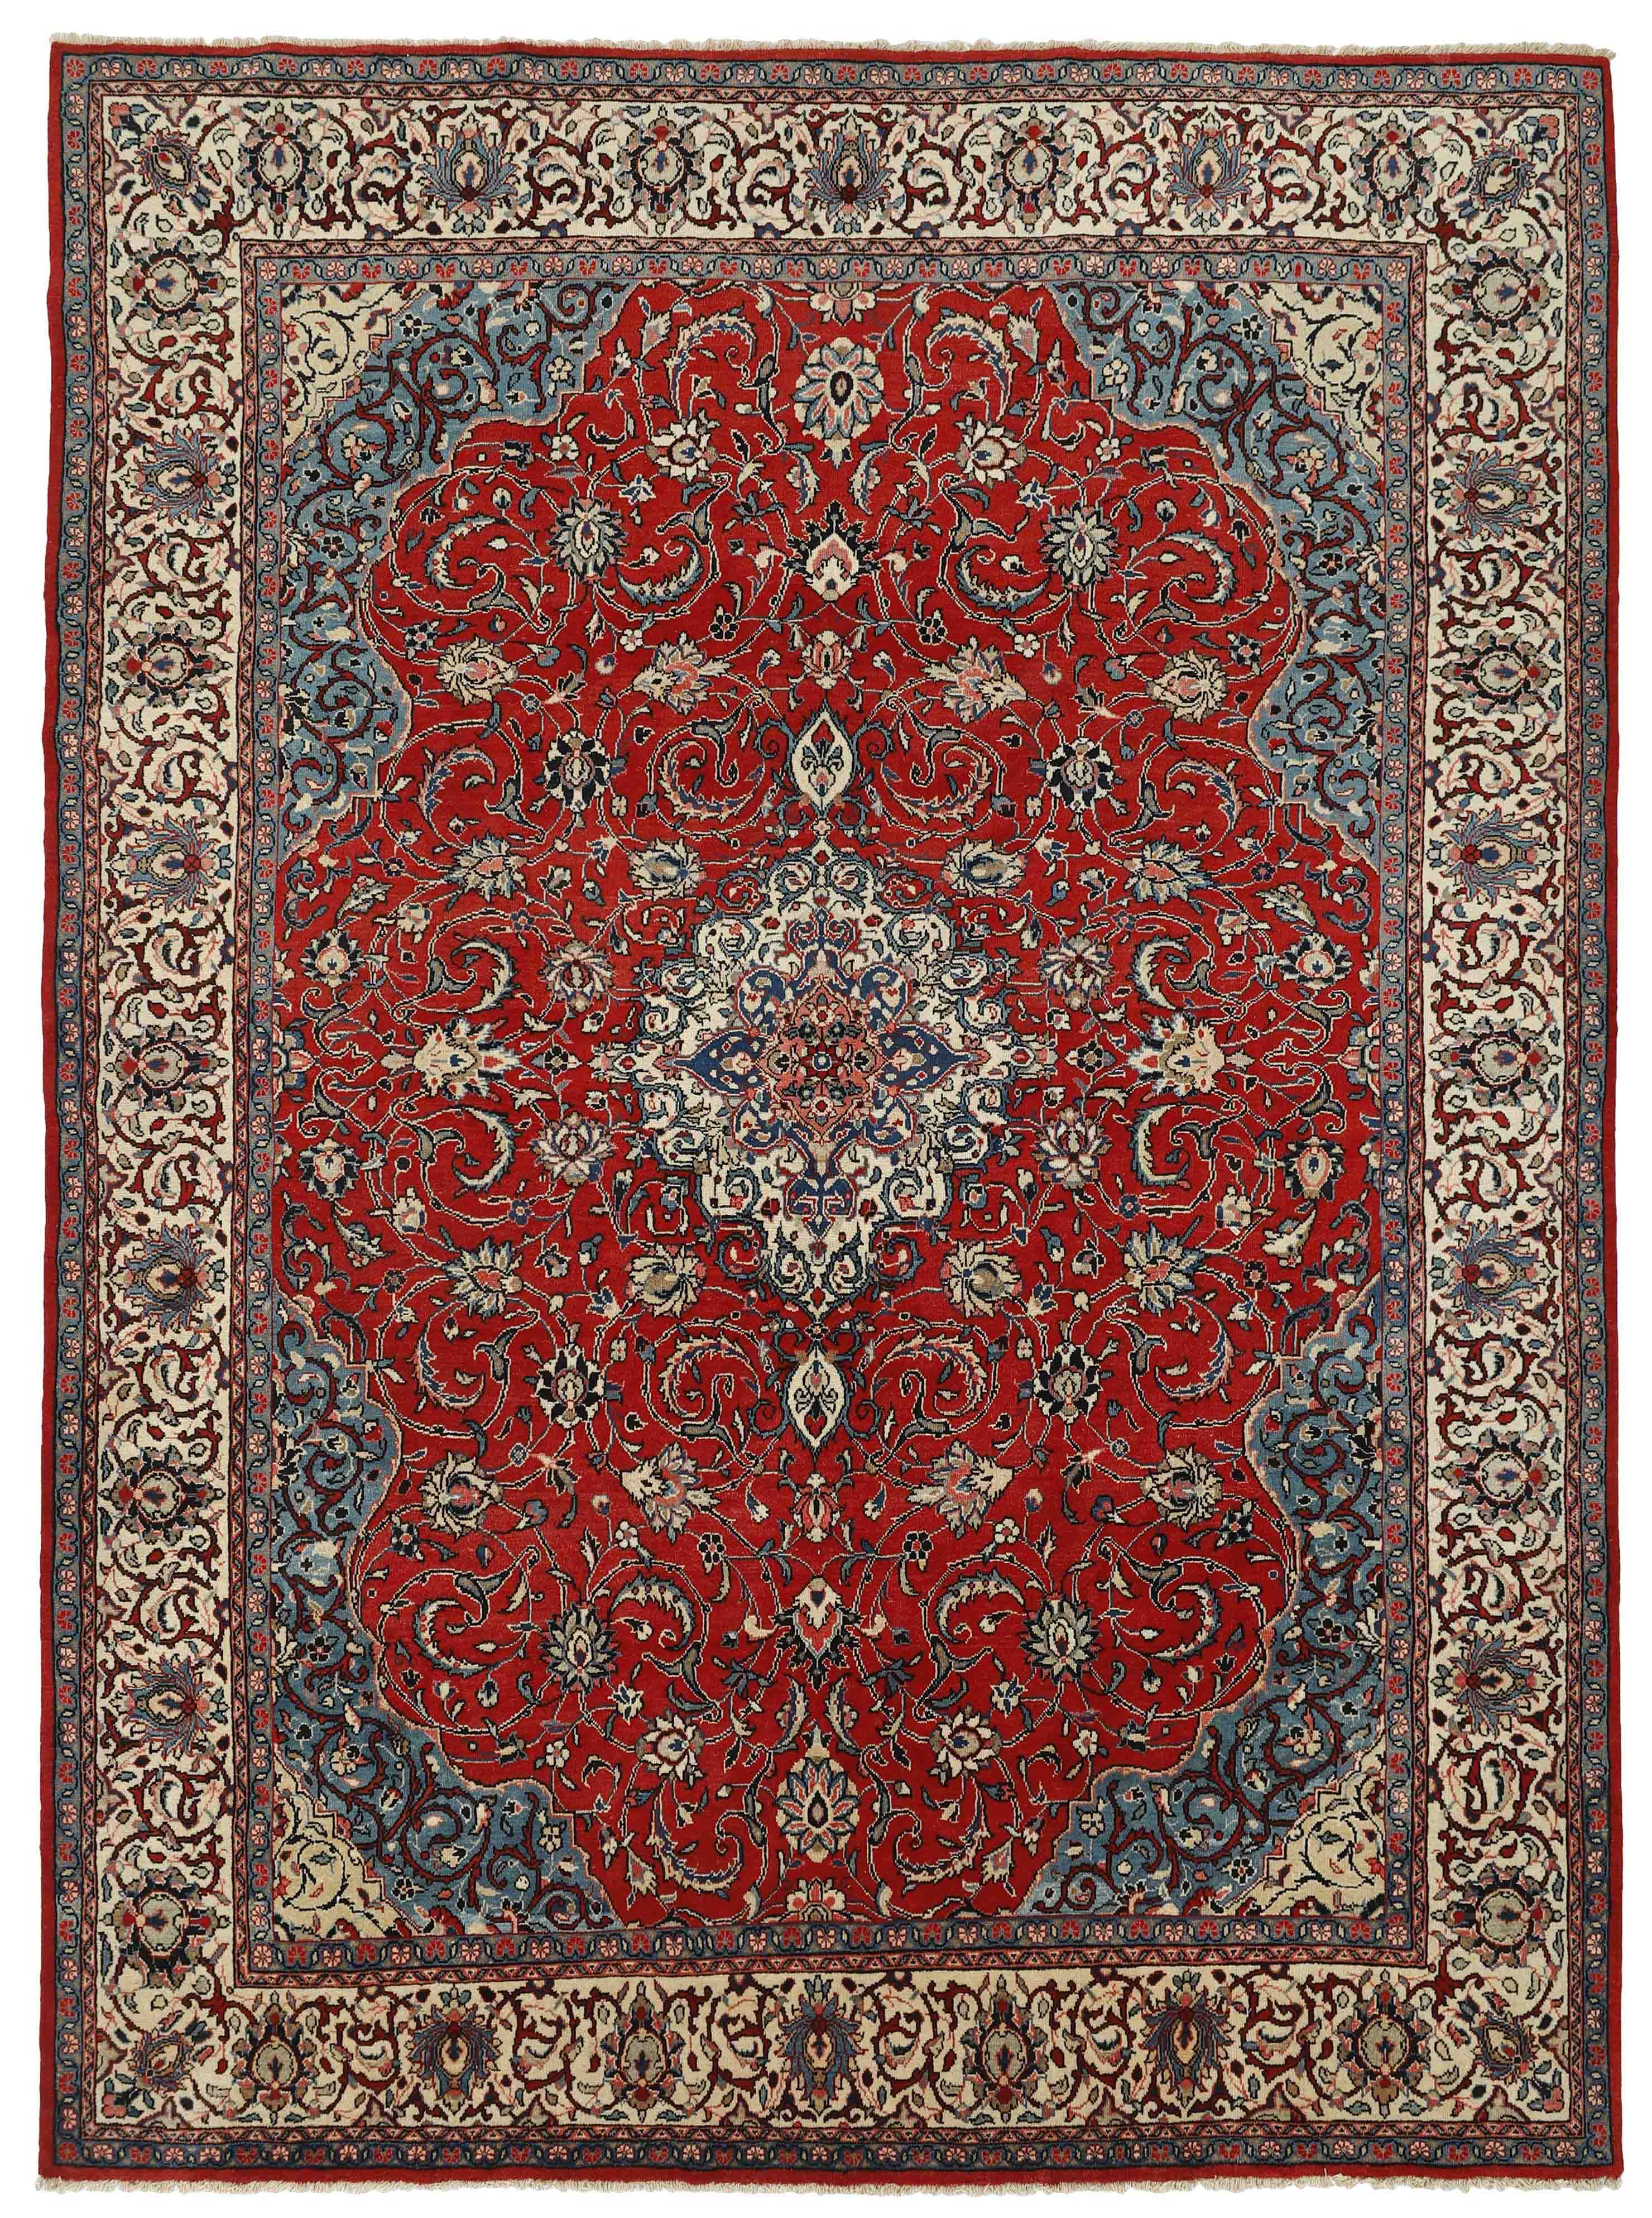 Large authentic persian rug with traditional floral pattern in red, black and cream